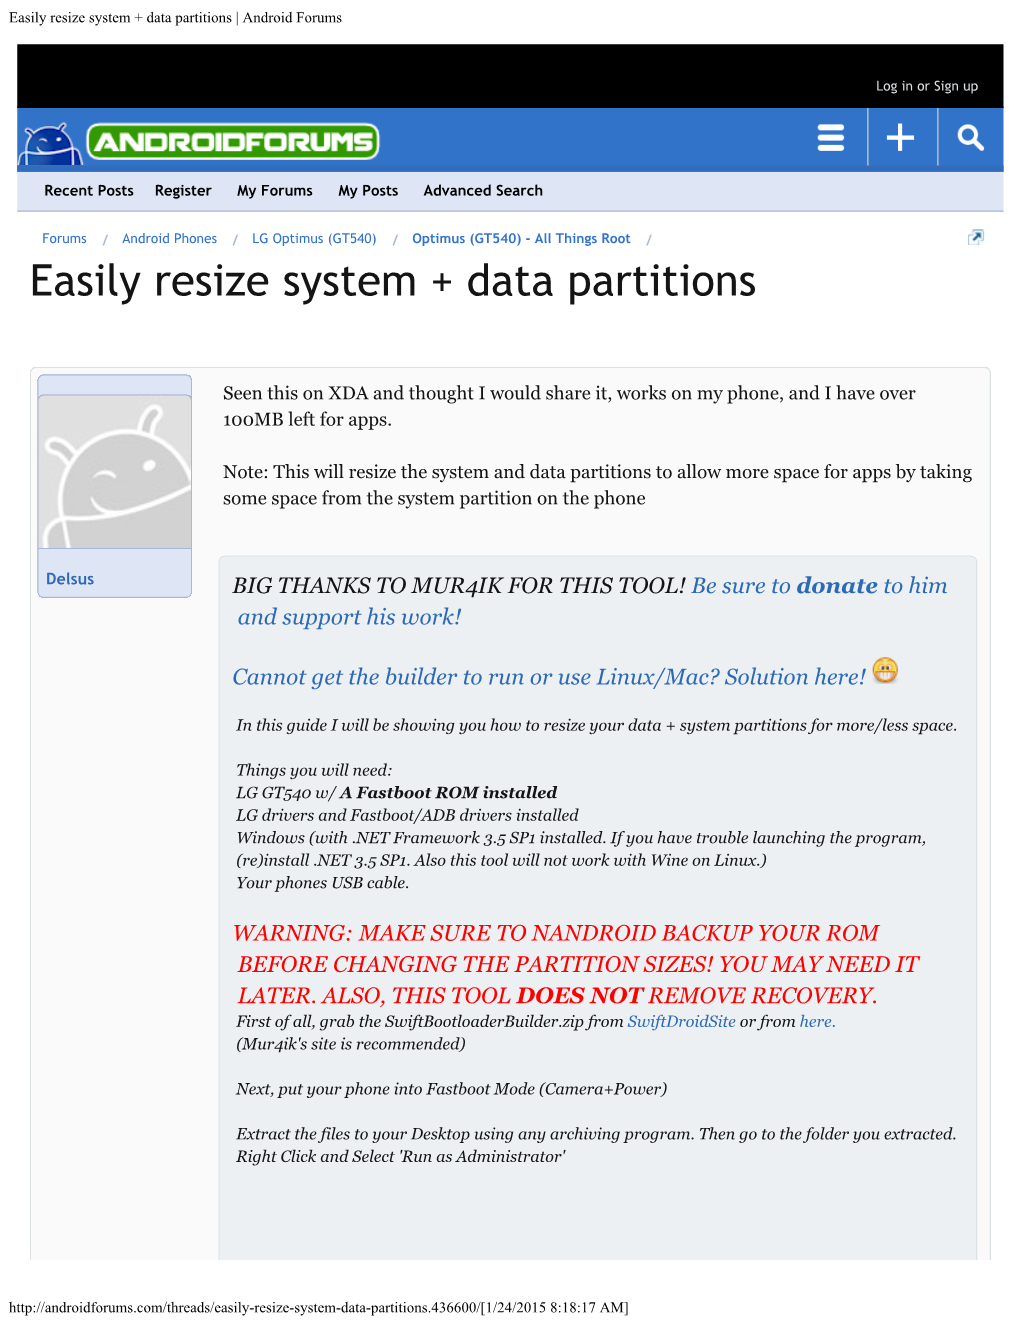 Easily Resize System + Data Partitions | Android Forums